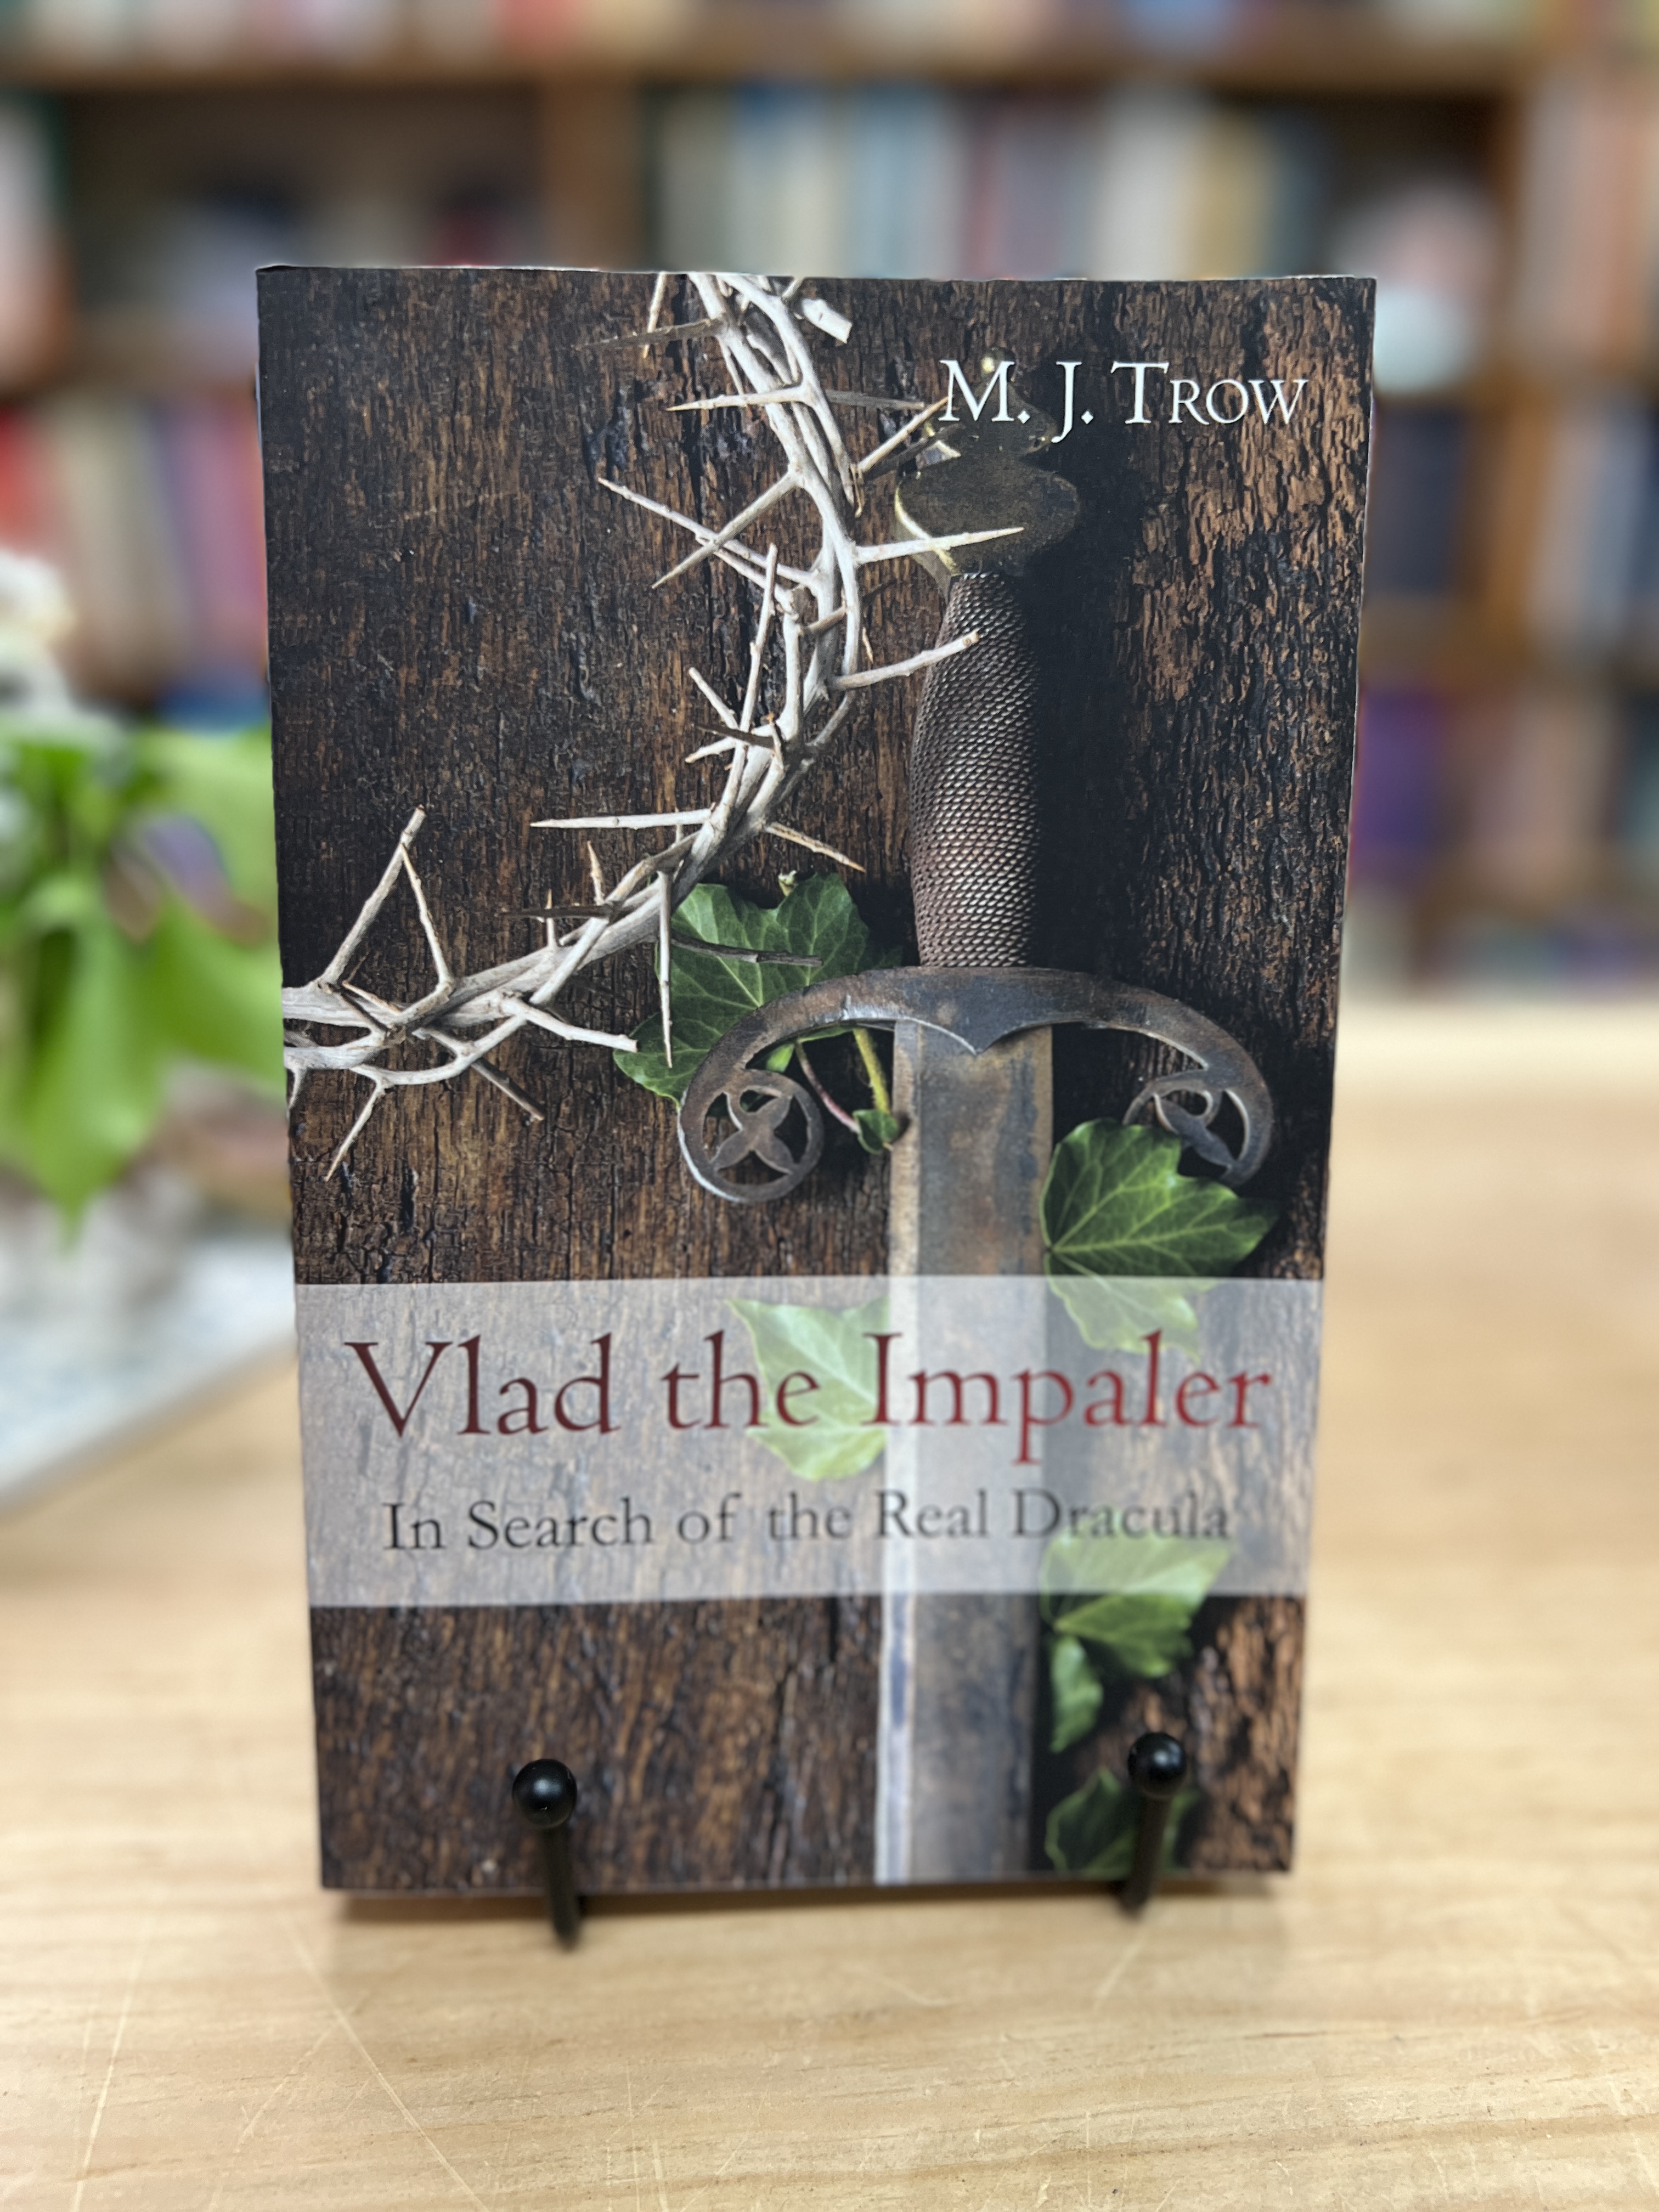 Image for "Vlad the Impaler, In Search of the Real Dracula"